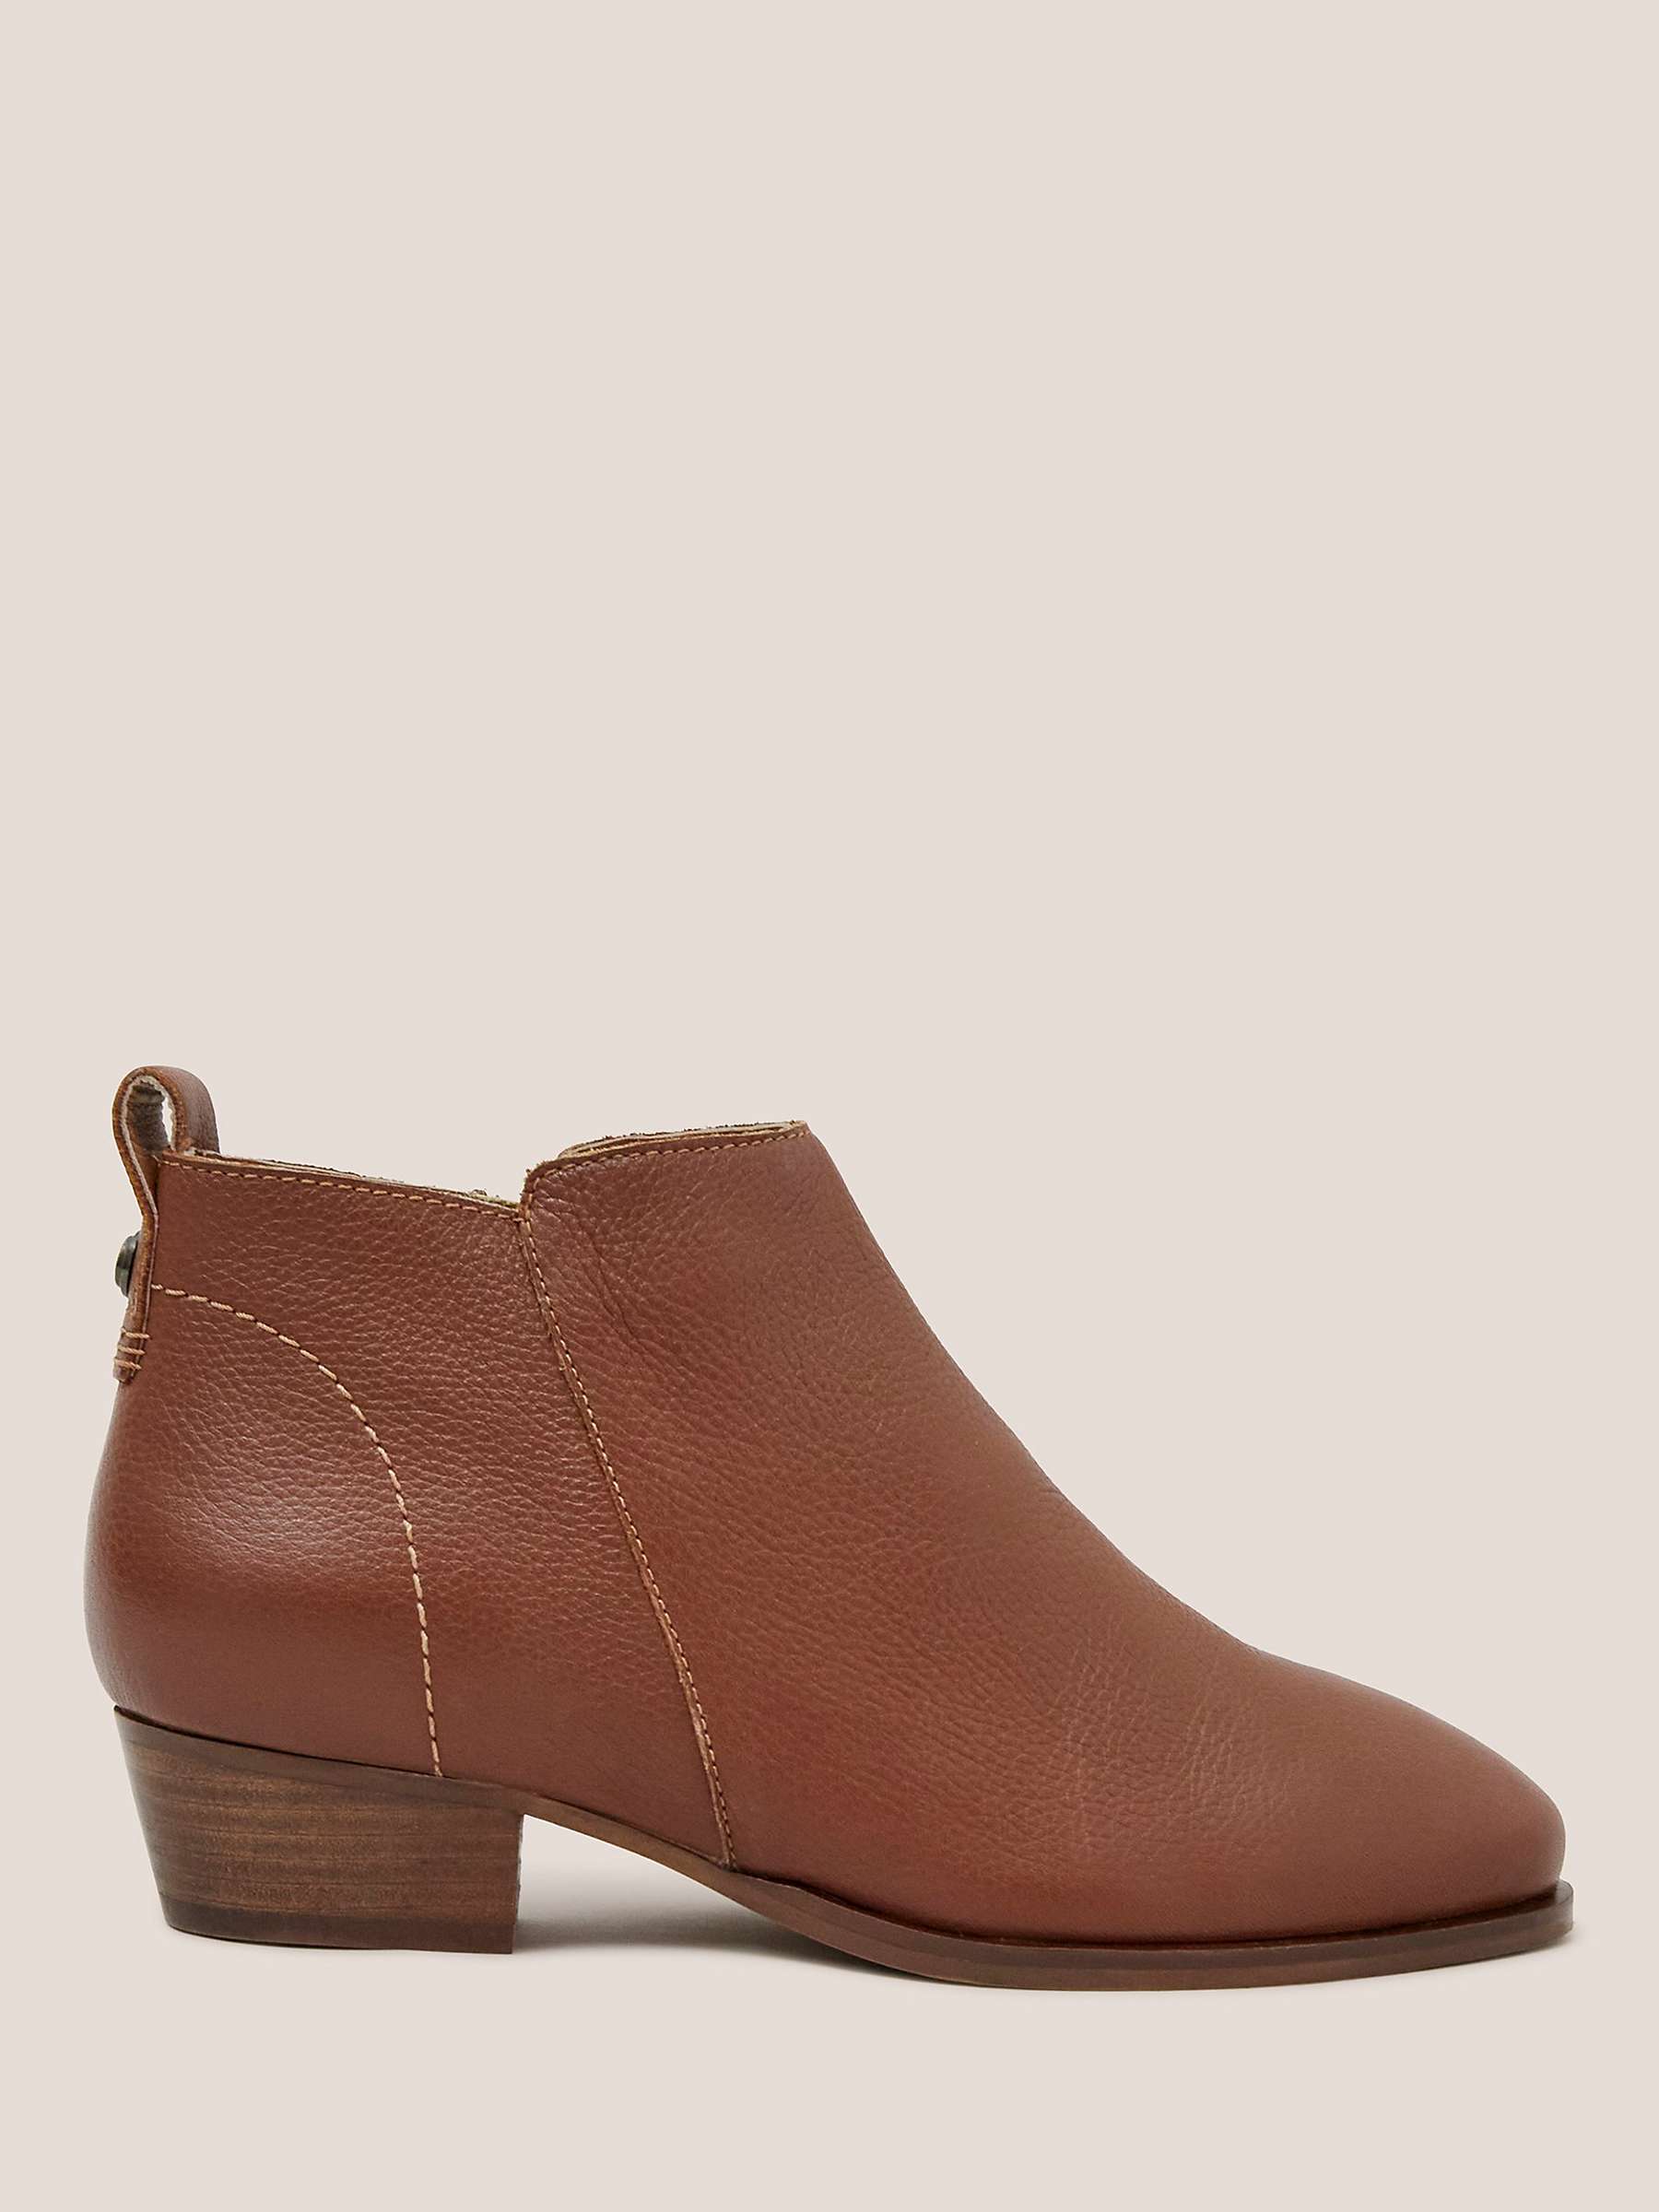 Buy White Stuff Leather Ankle Boots Online at johnlewis.com